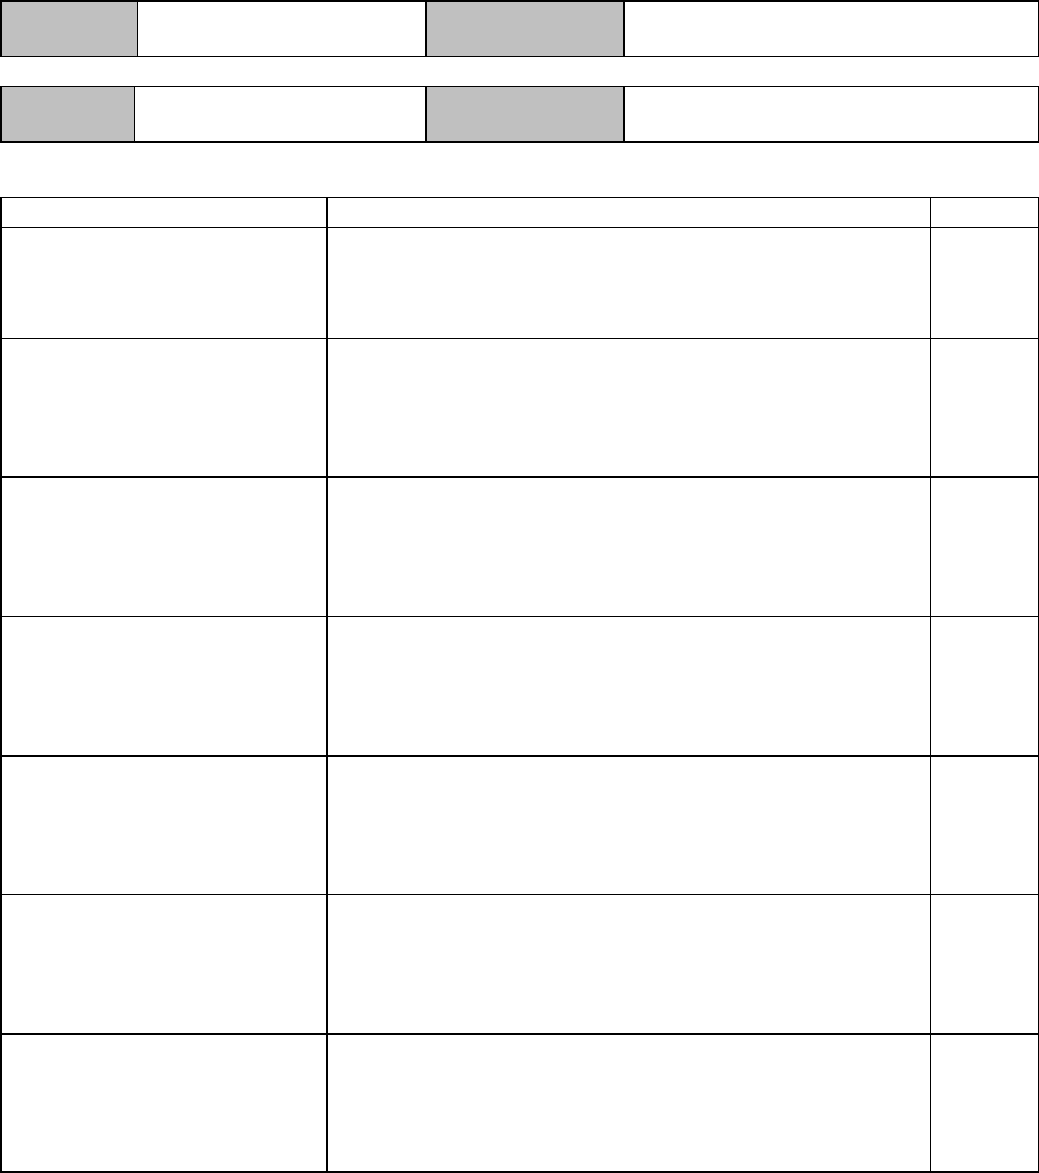 student-weekly-log-sheet-in-word-and-pdf-formats